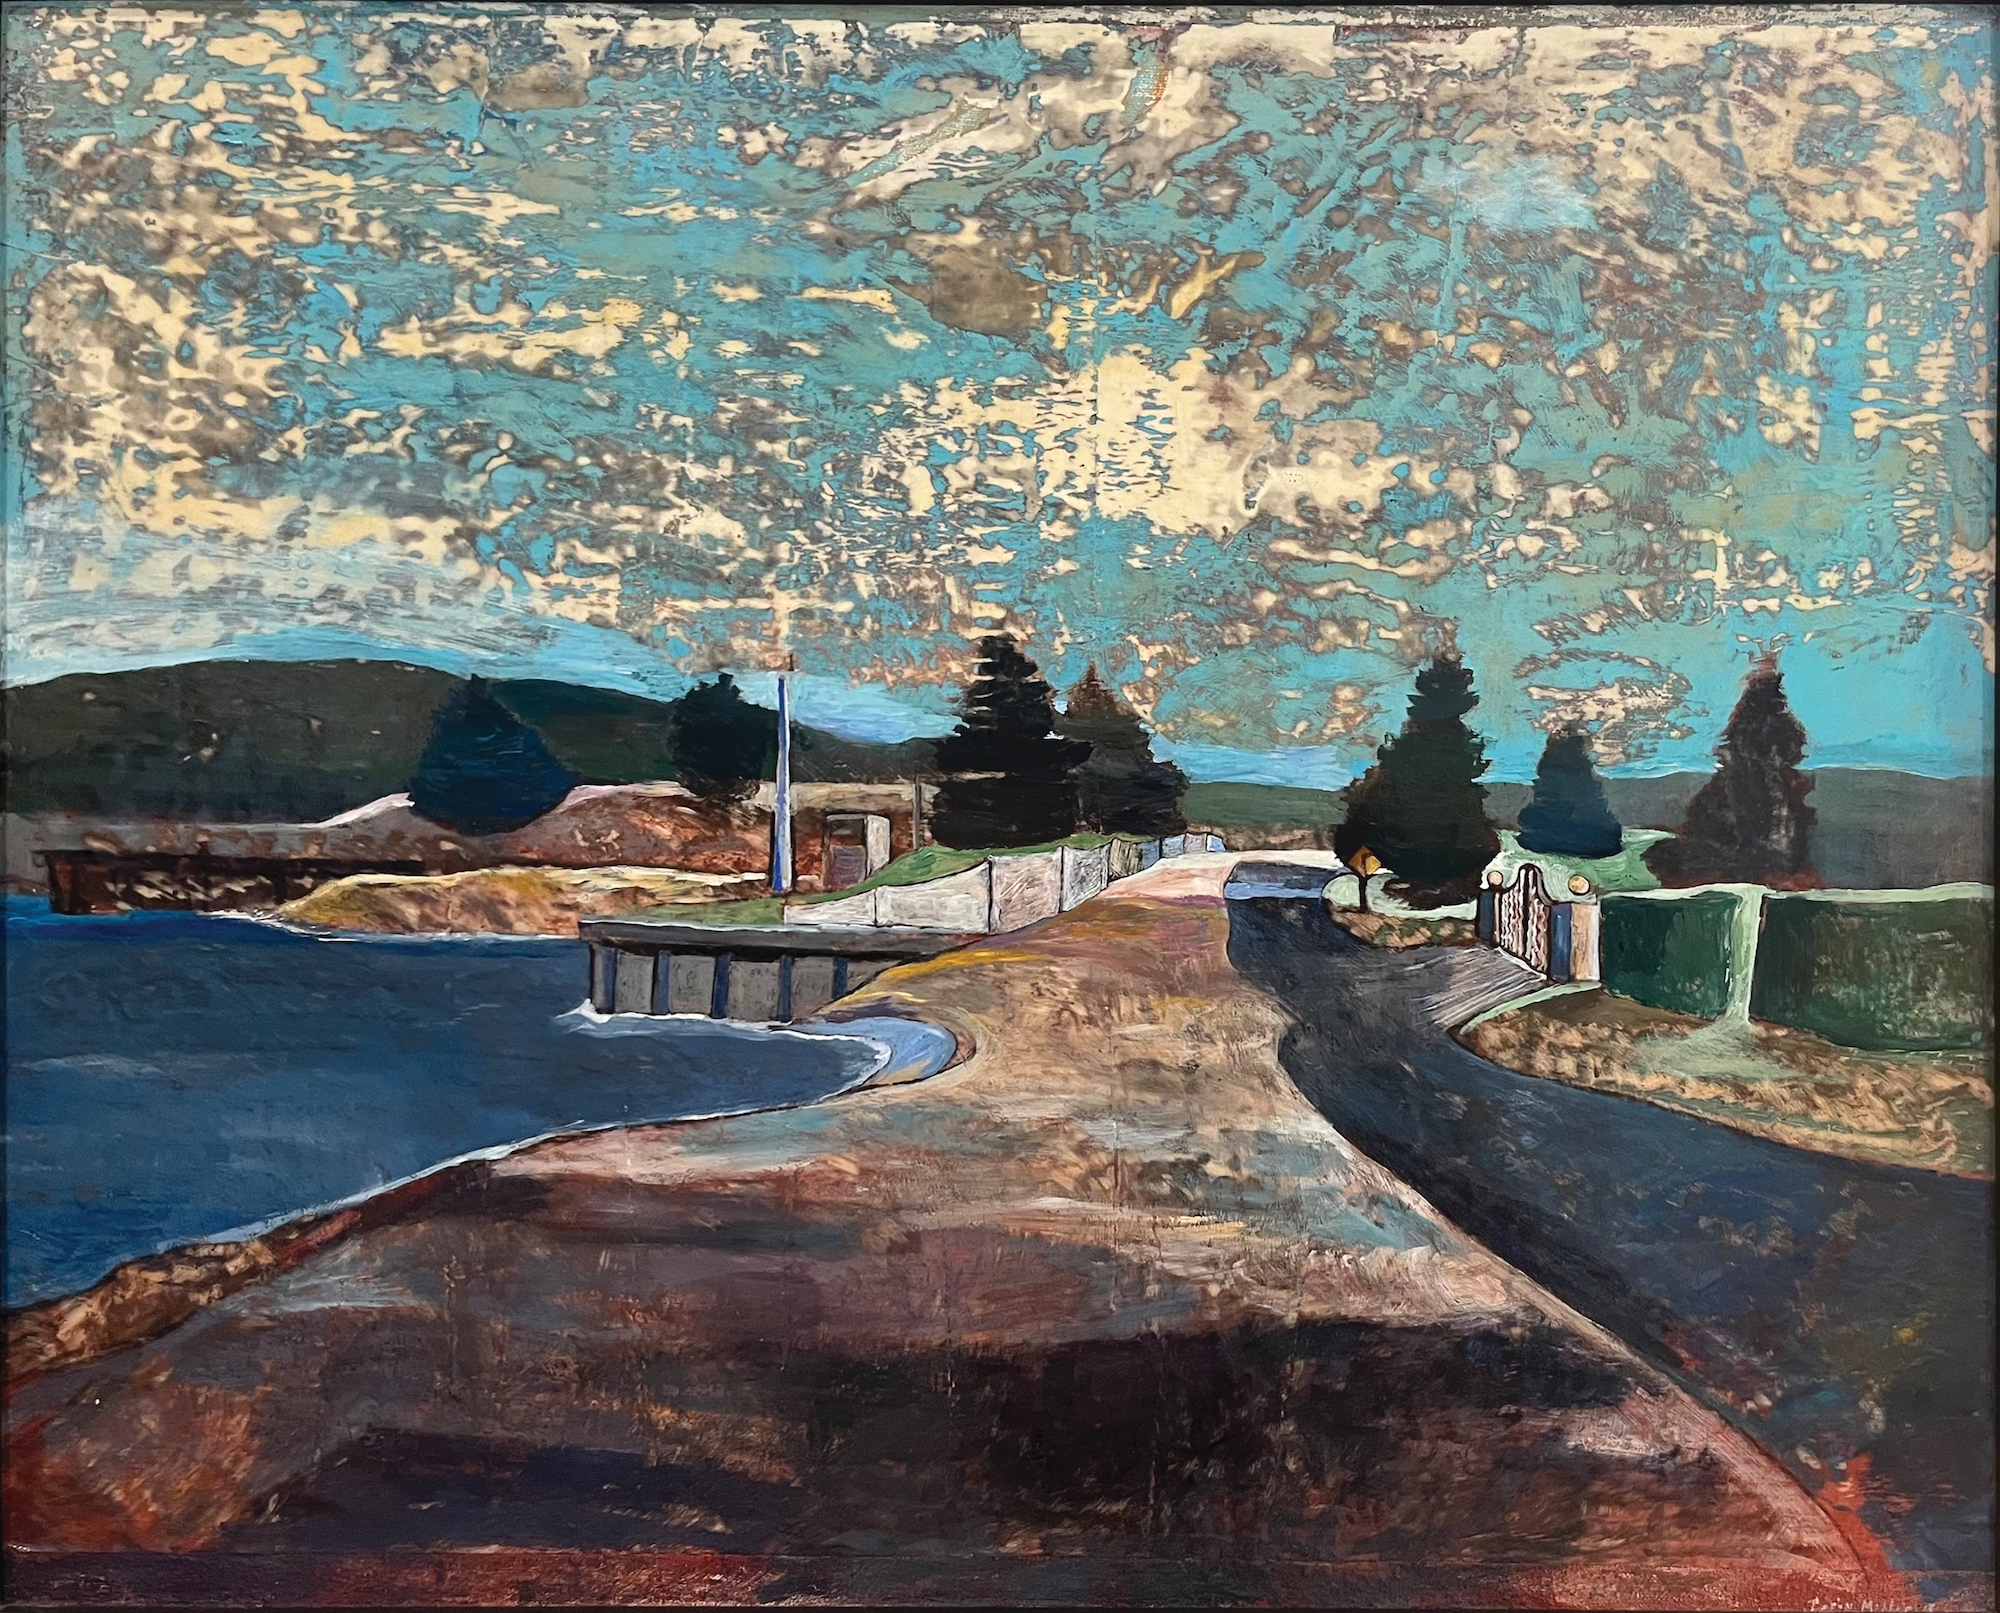 Paton Miller's "Sebonac Inlet" (private collection, oil, 36" x 40")